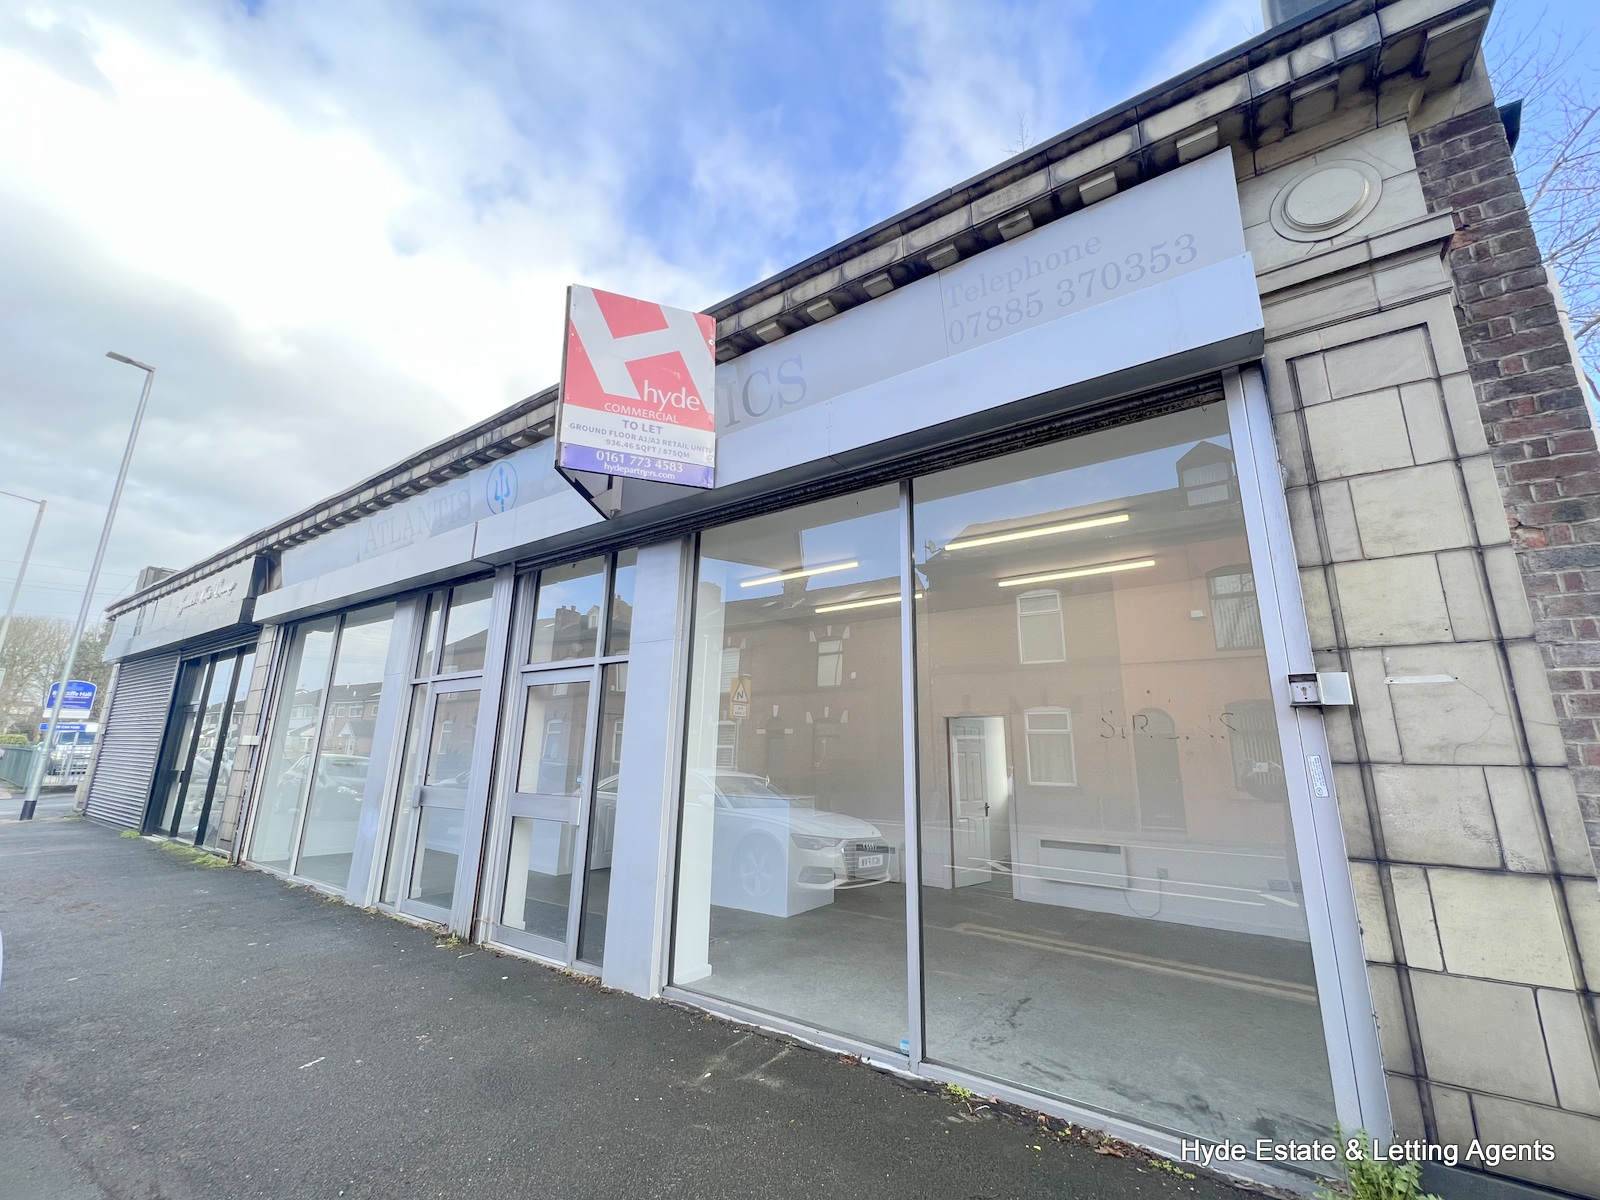 Images for 17-19, Bury Street, Radcliffe, Manchester, M26 2GB